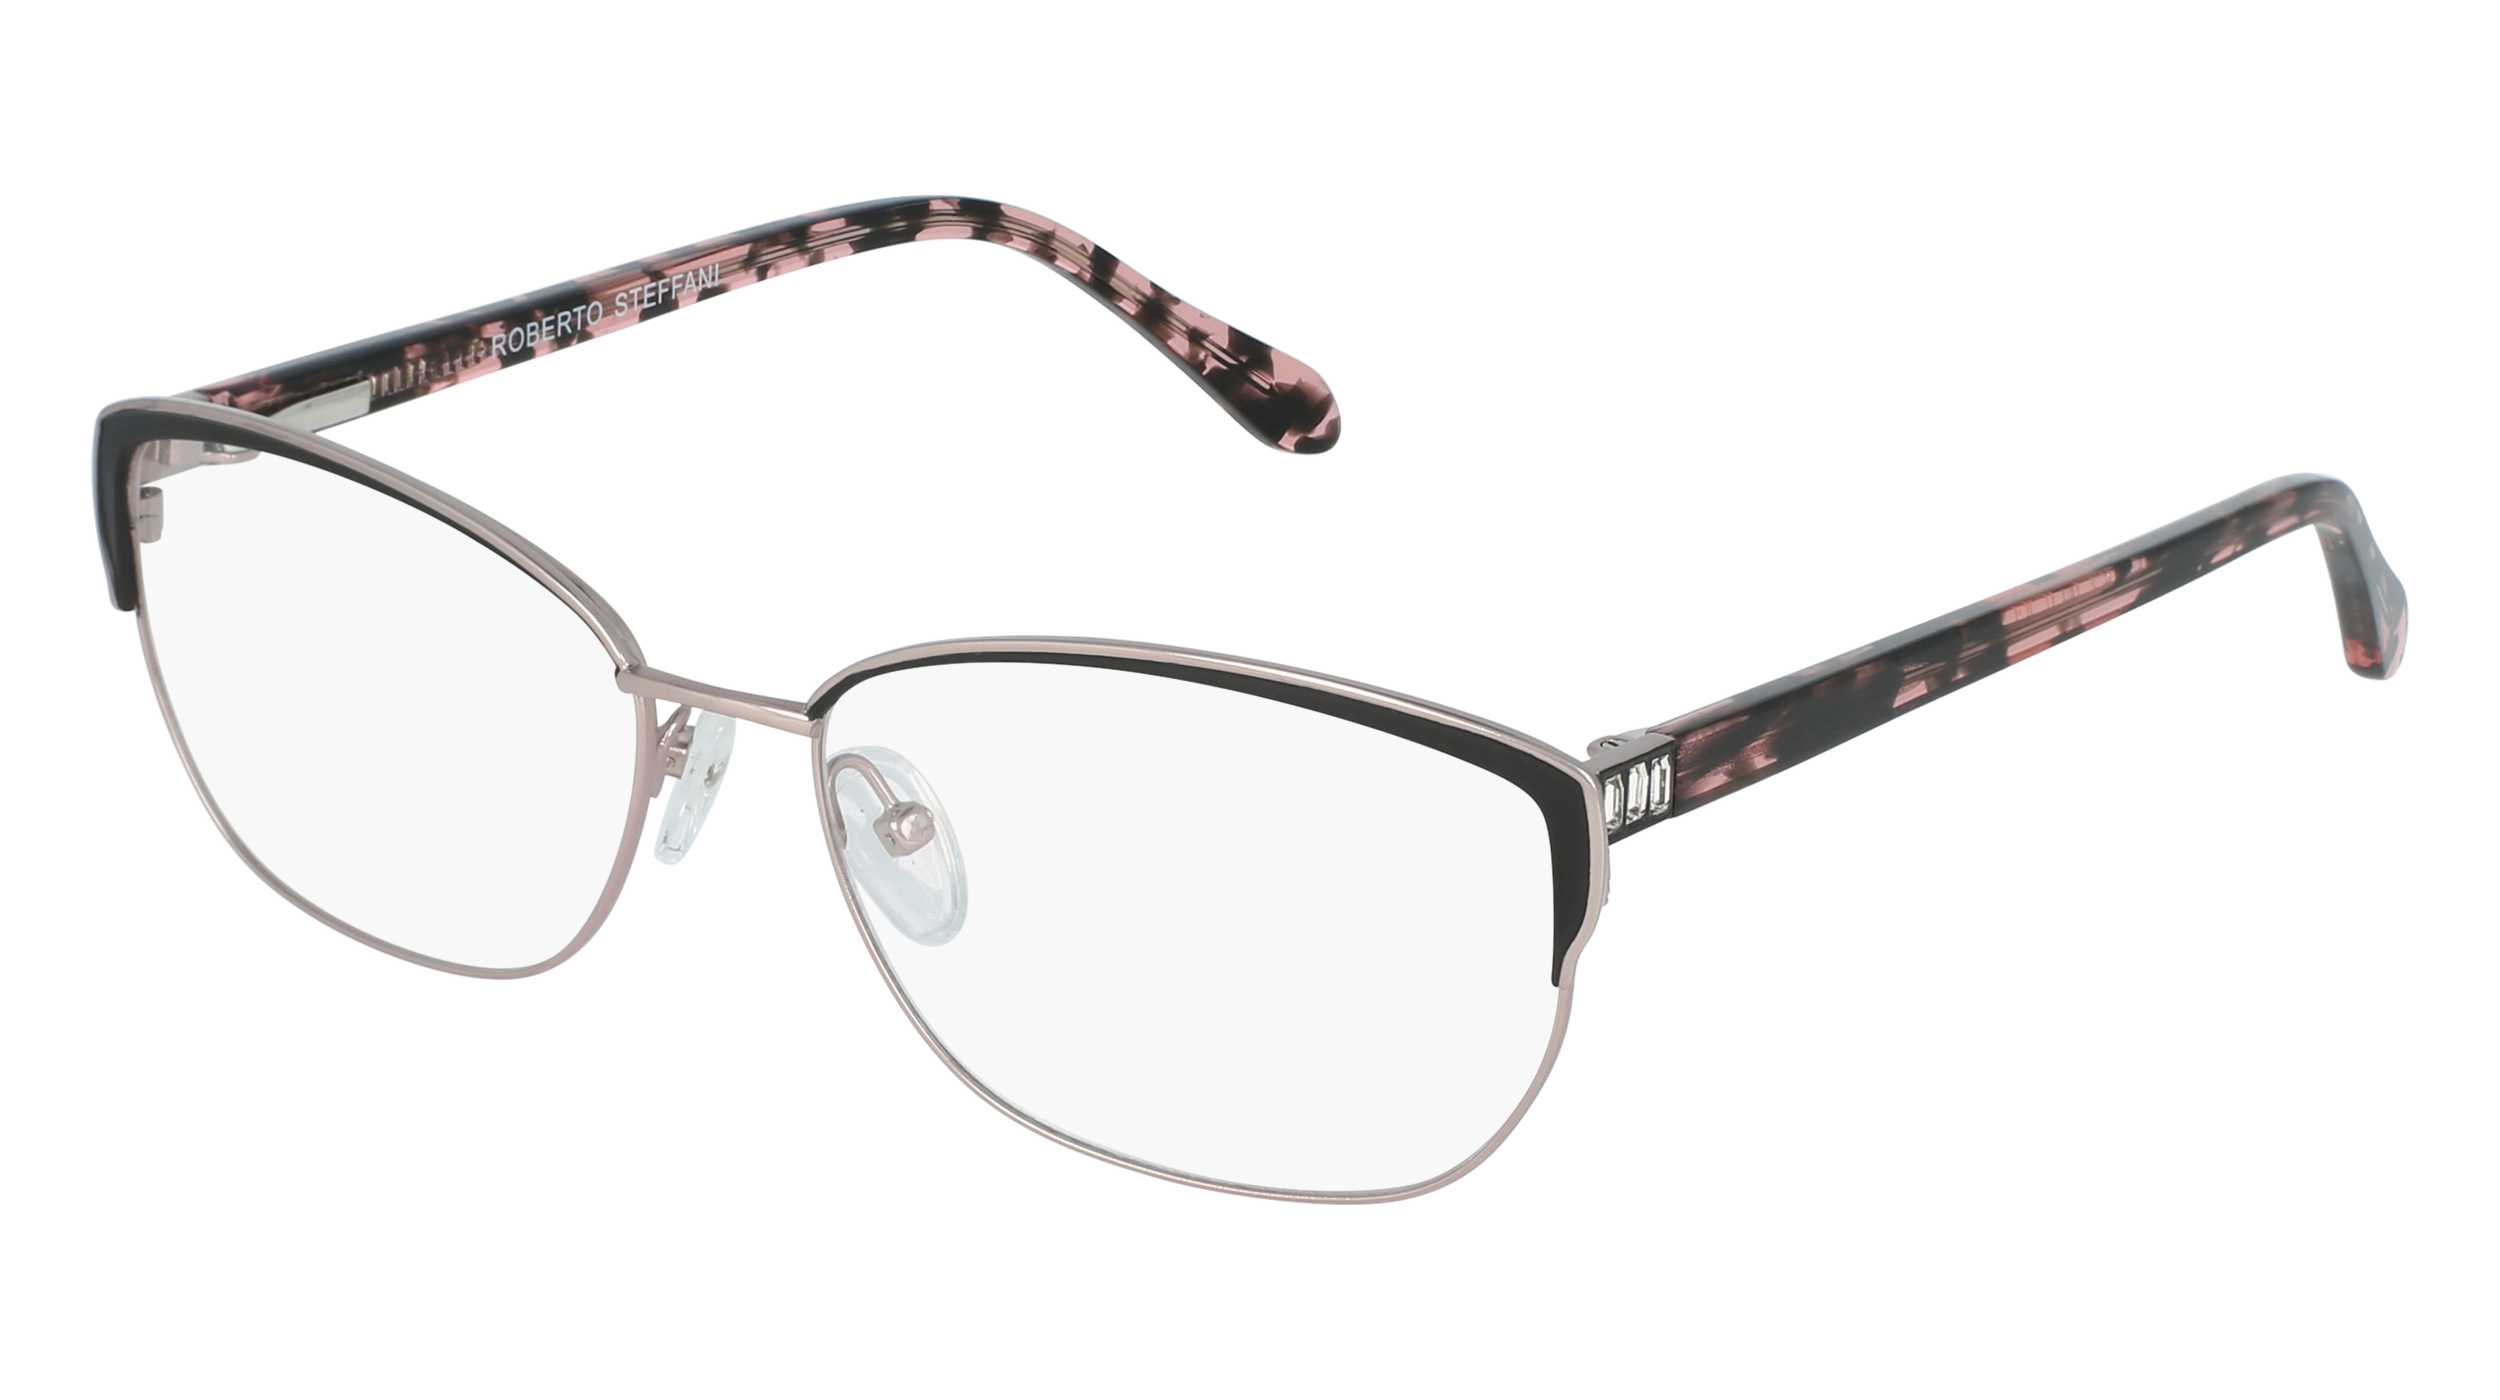 R RS 163 women's eyeglasses (from the side)